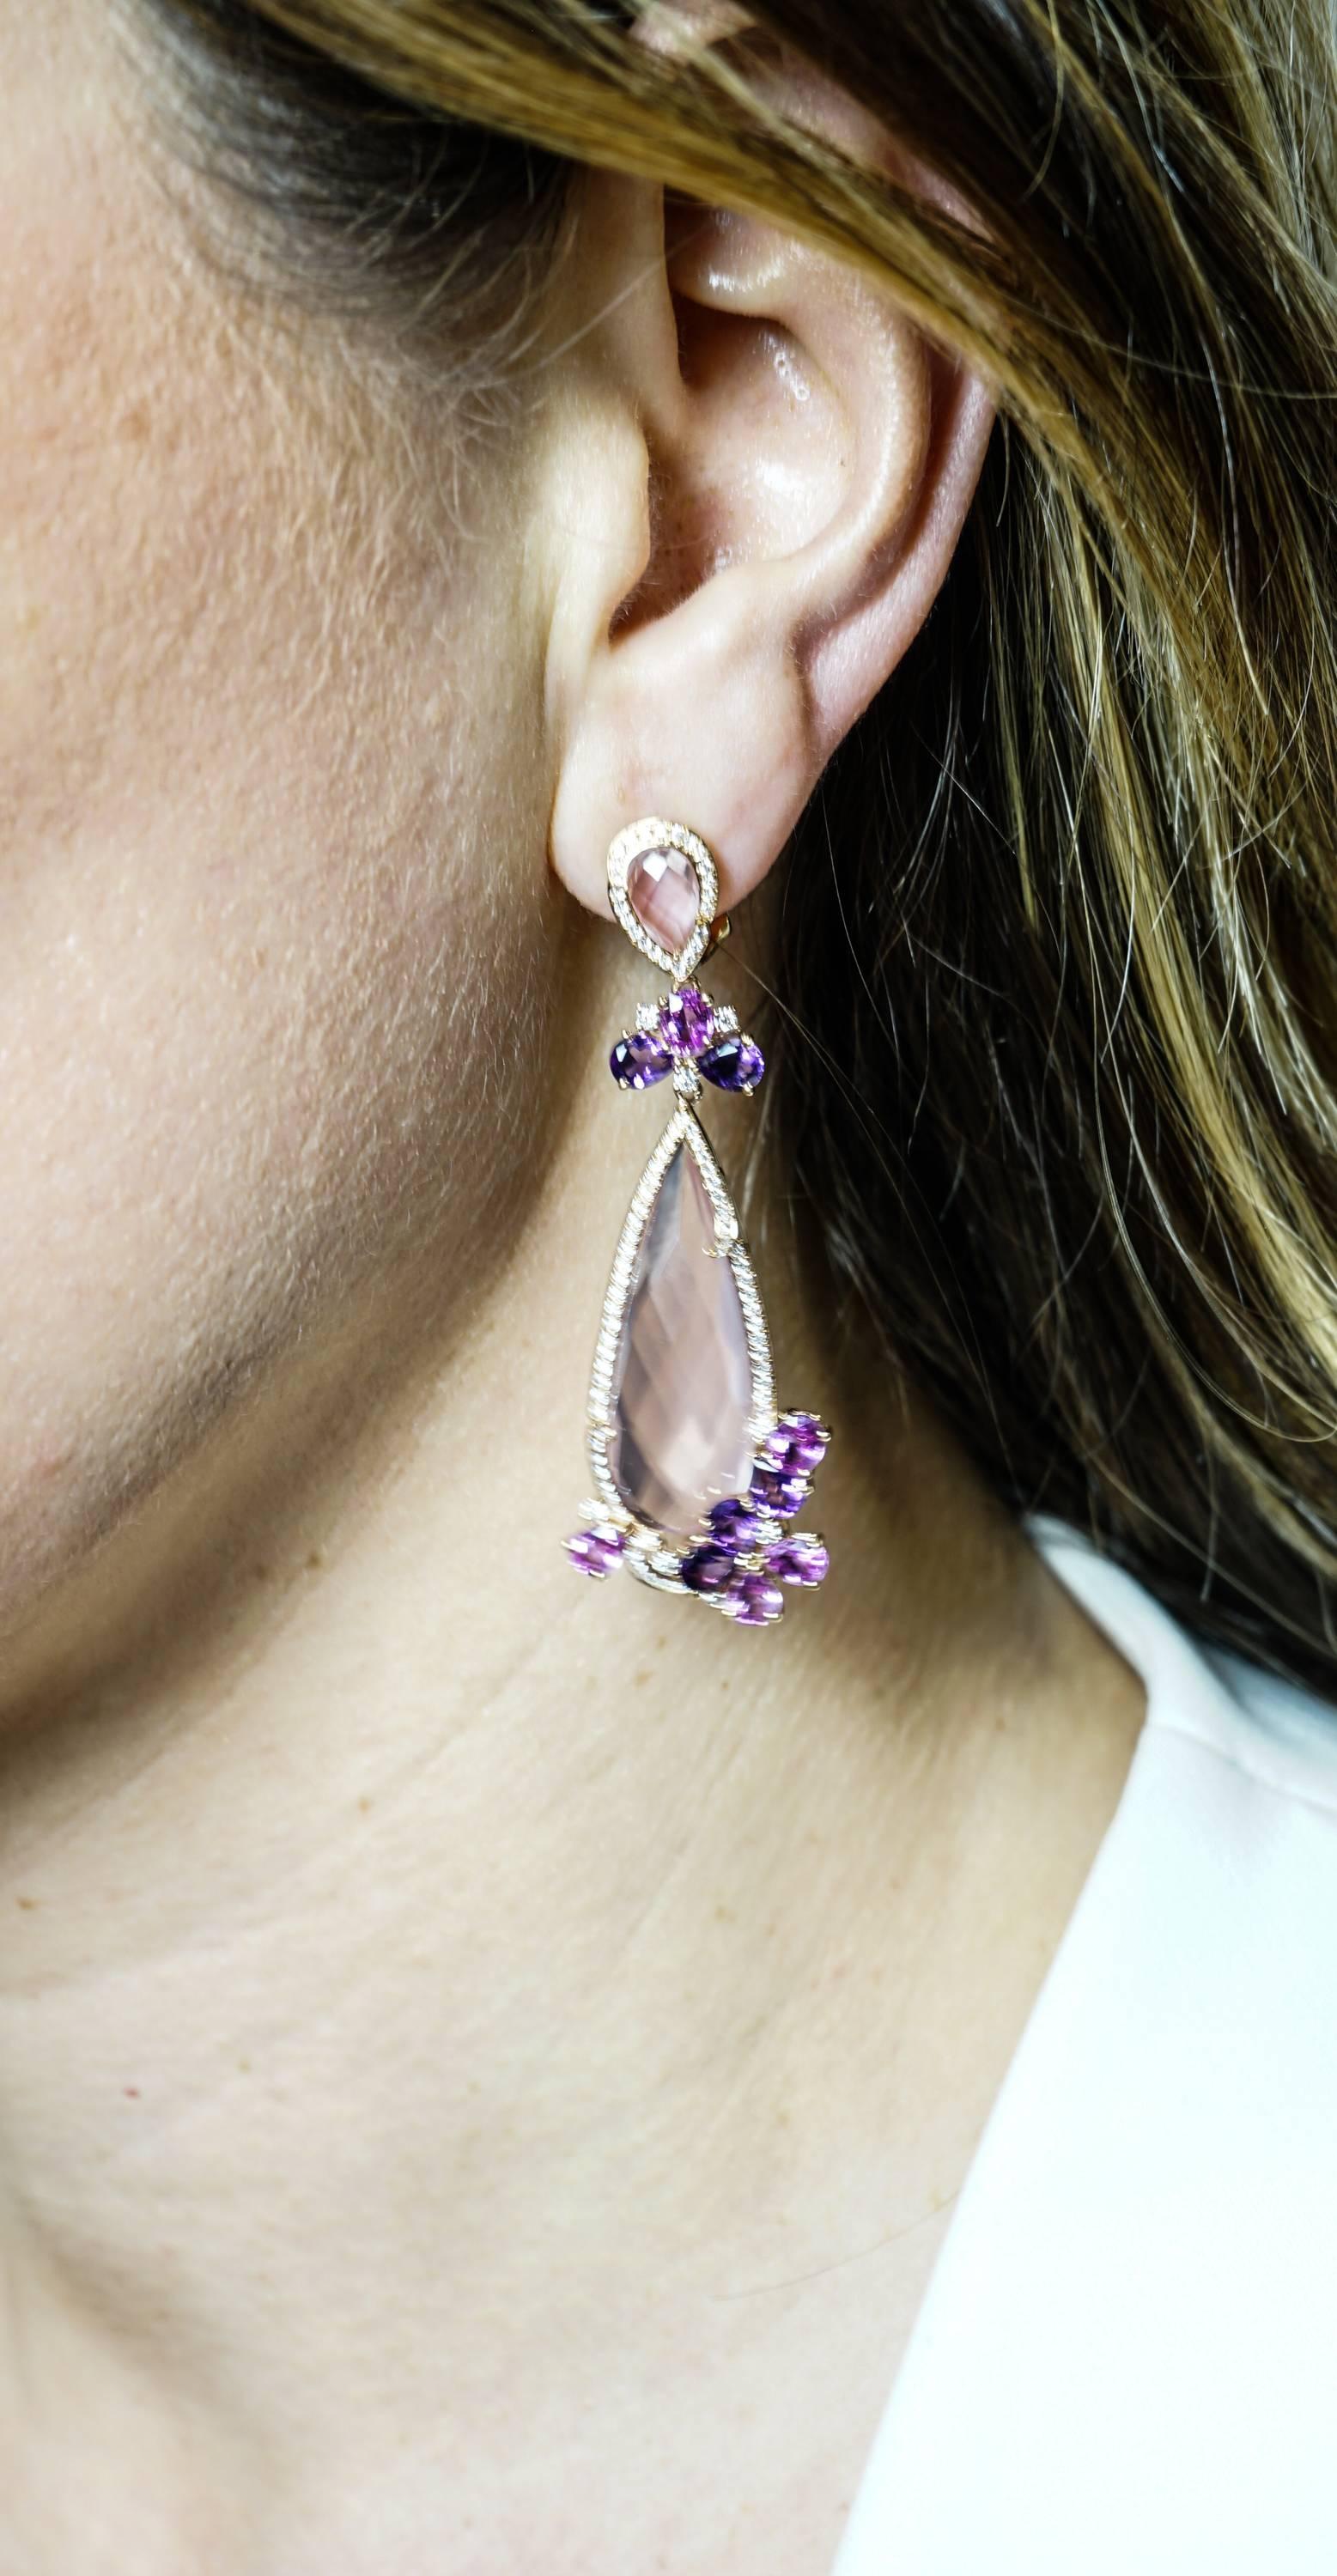 Artist Pear Shaped Pink Quartz, Pinks Sapphires and Amethyst Drop Earrings